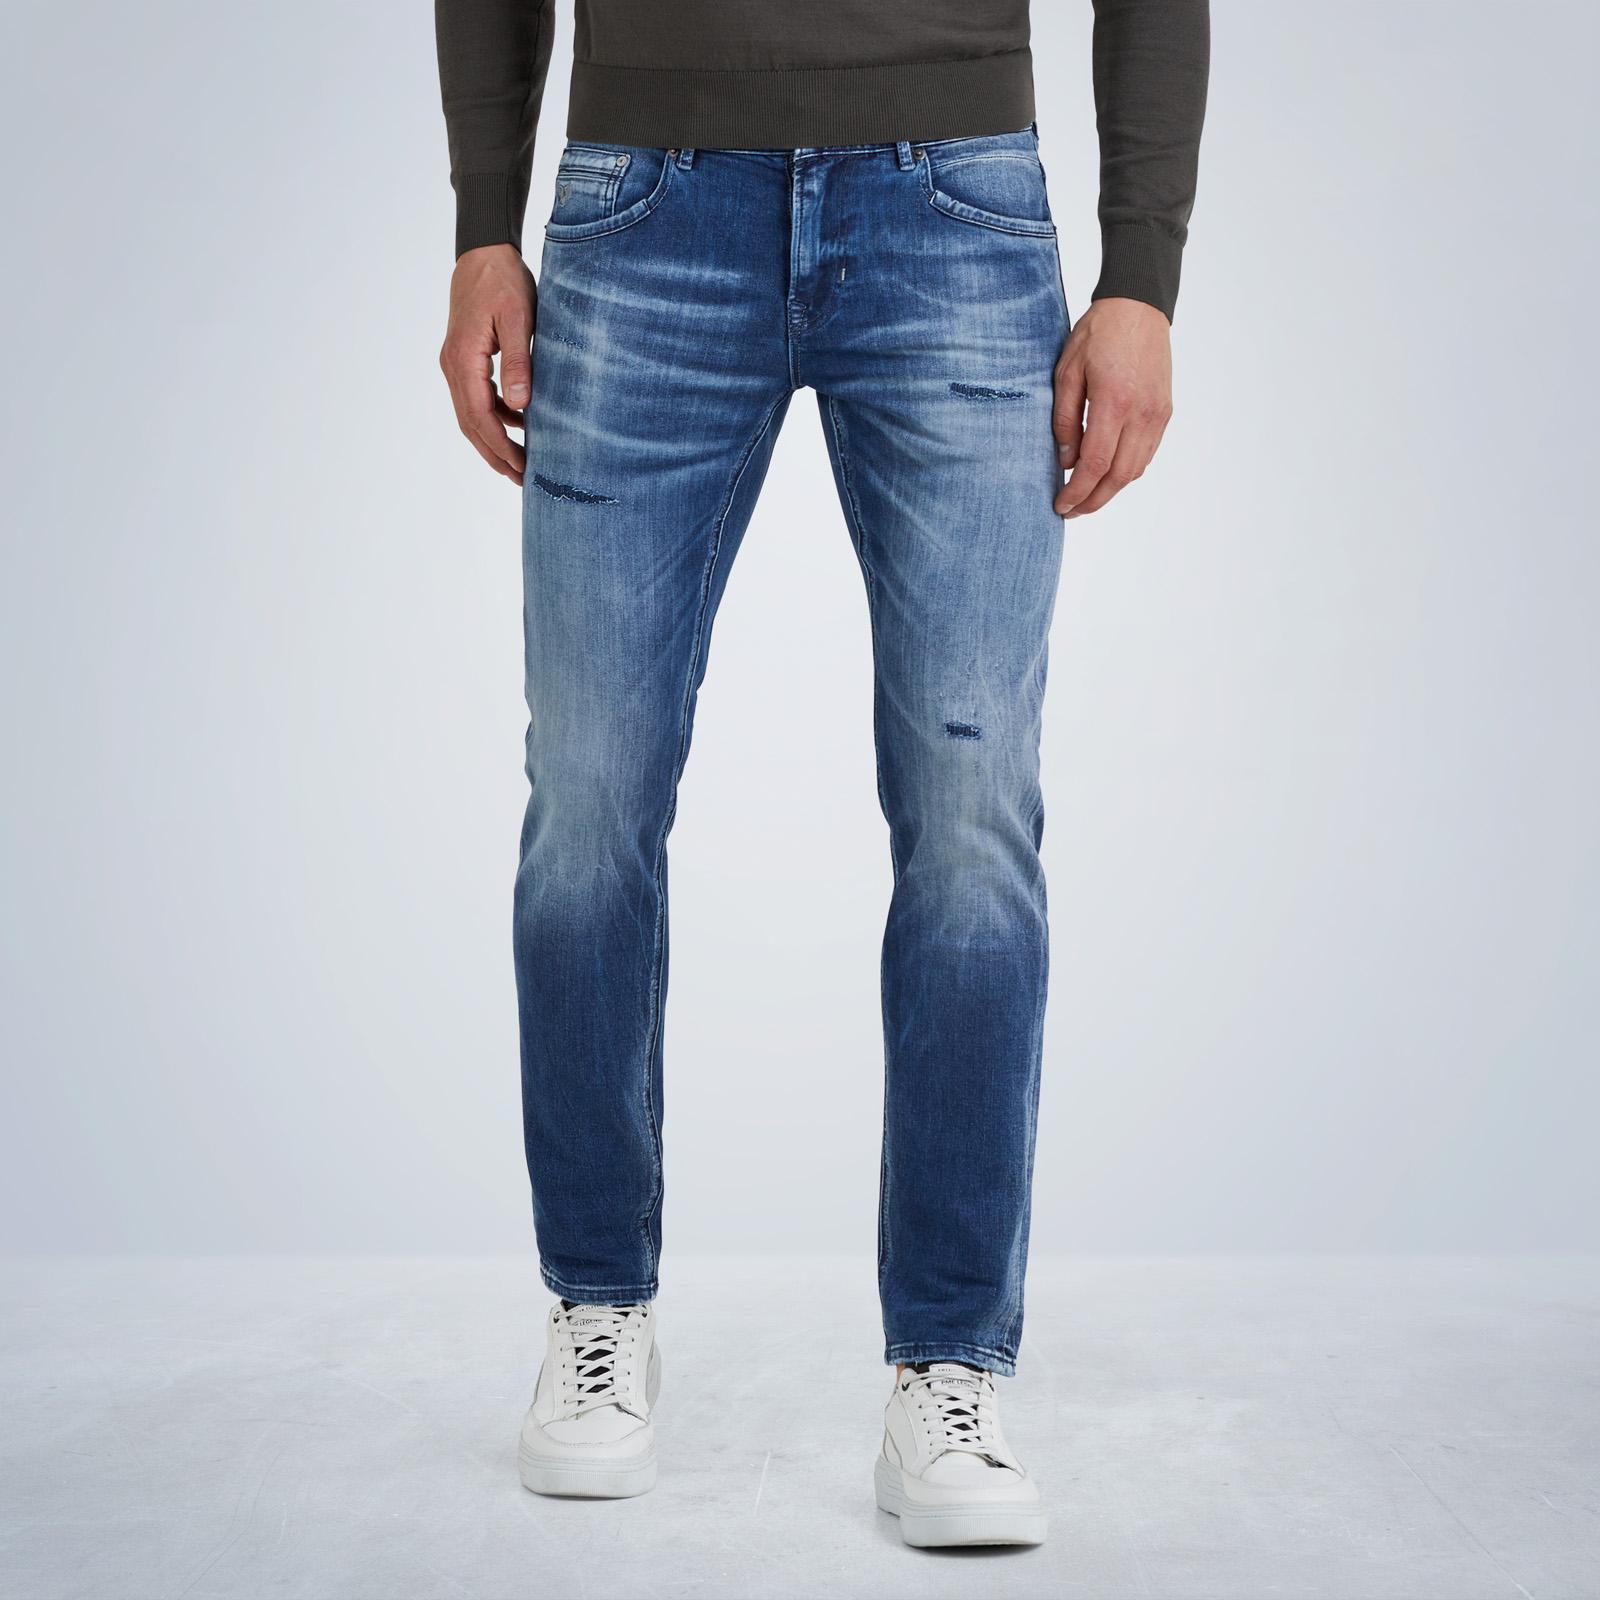 PME Legend Tailwheel Slim Fit Jeans mit Repair-Marks product